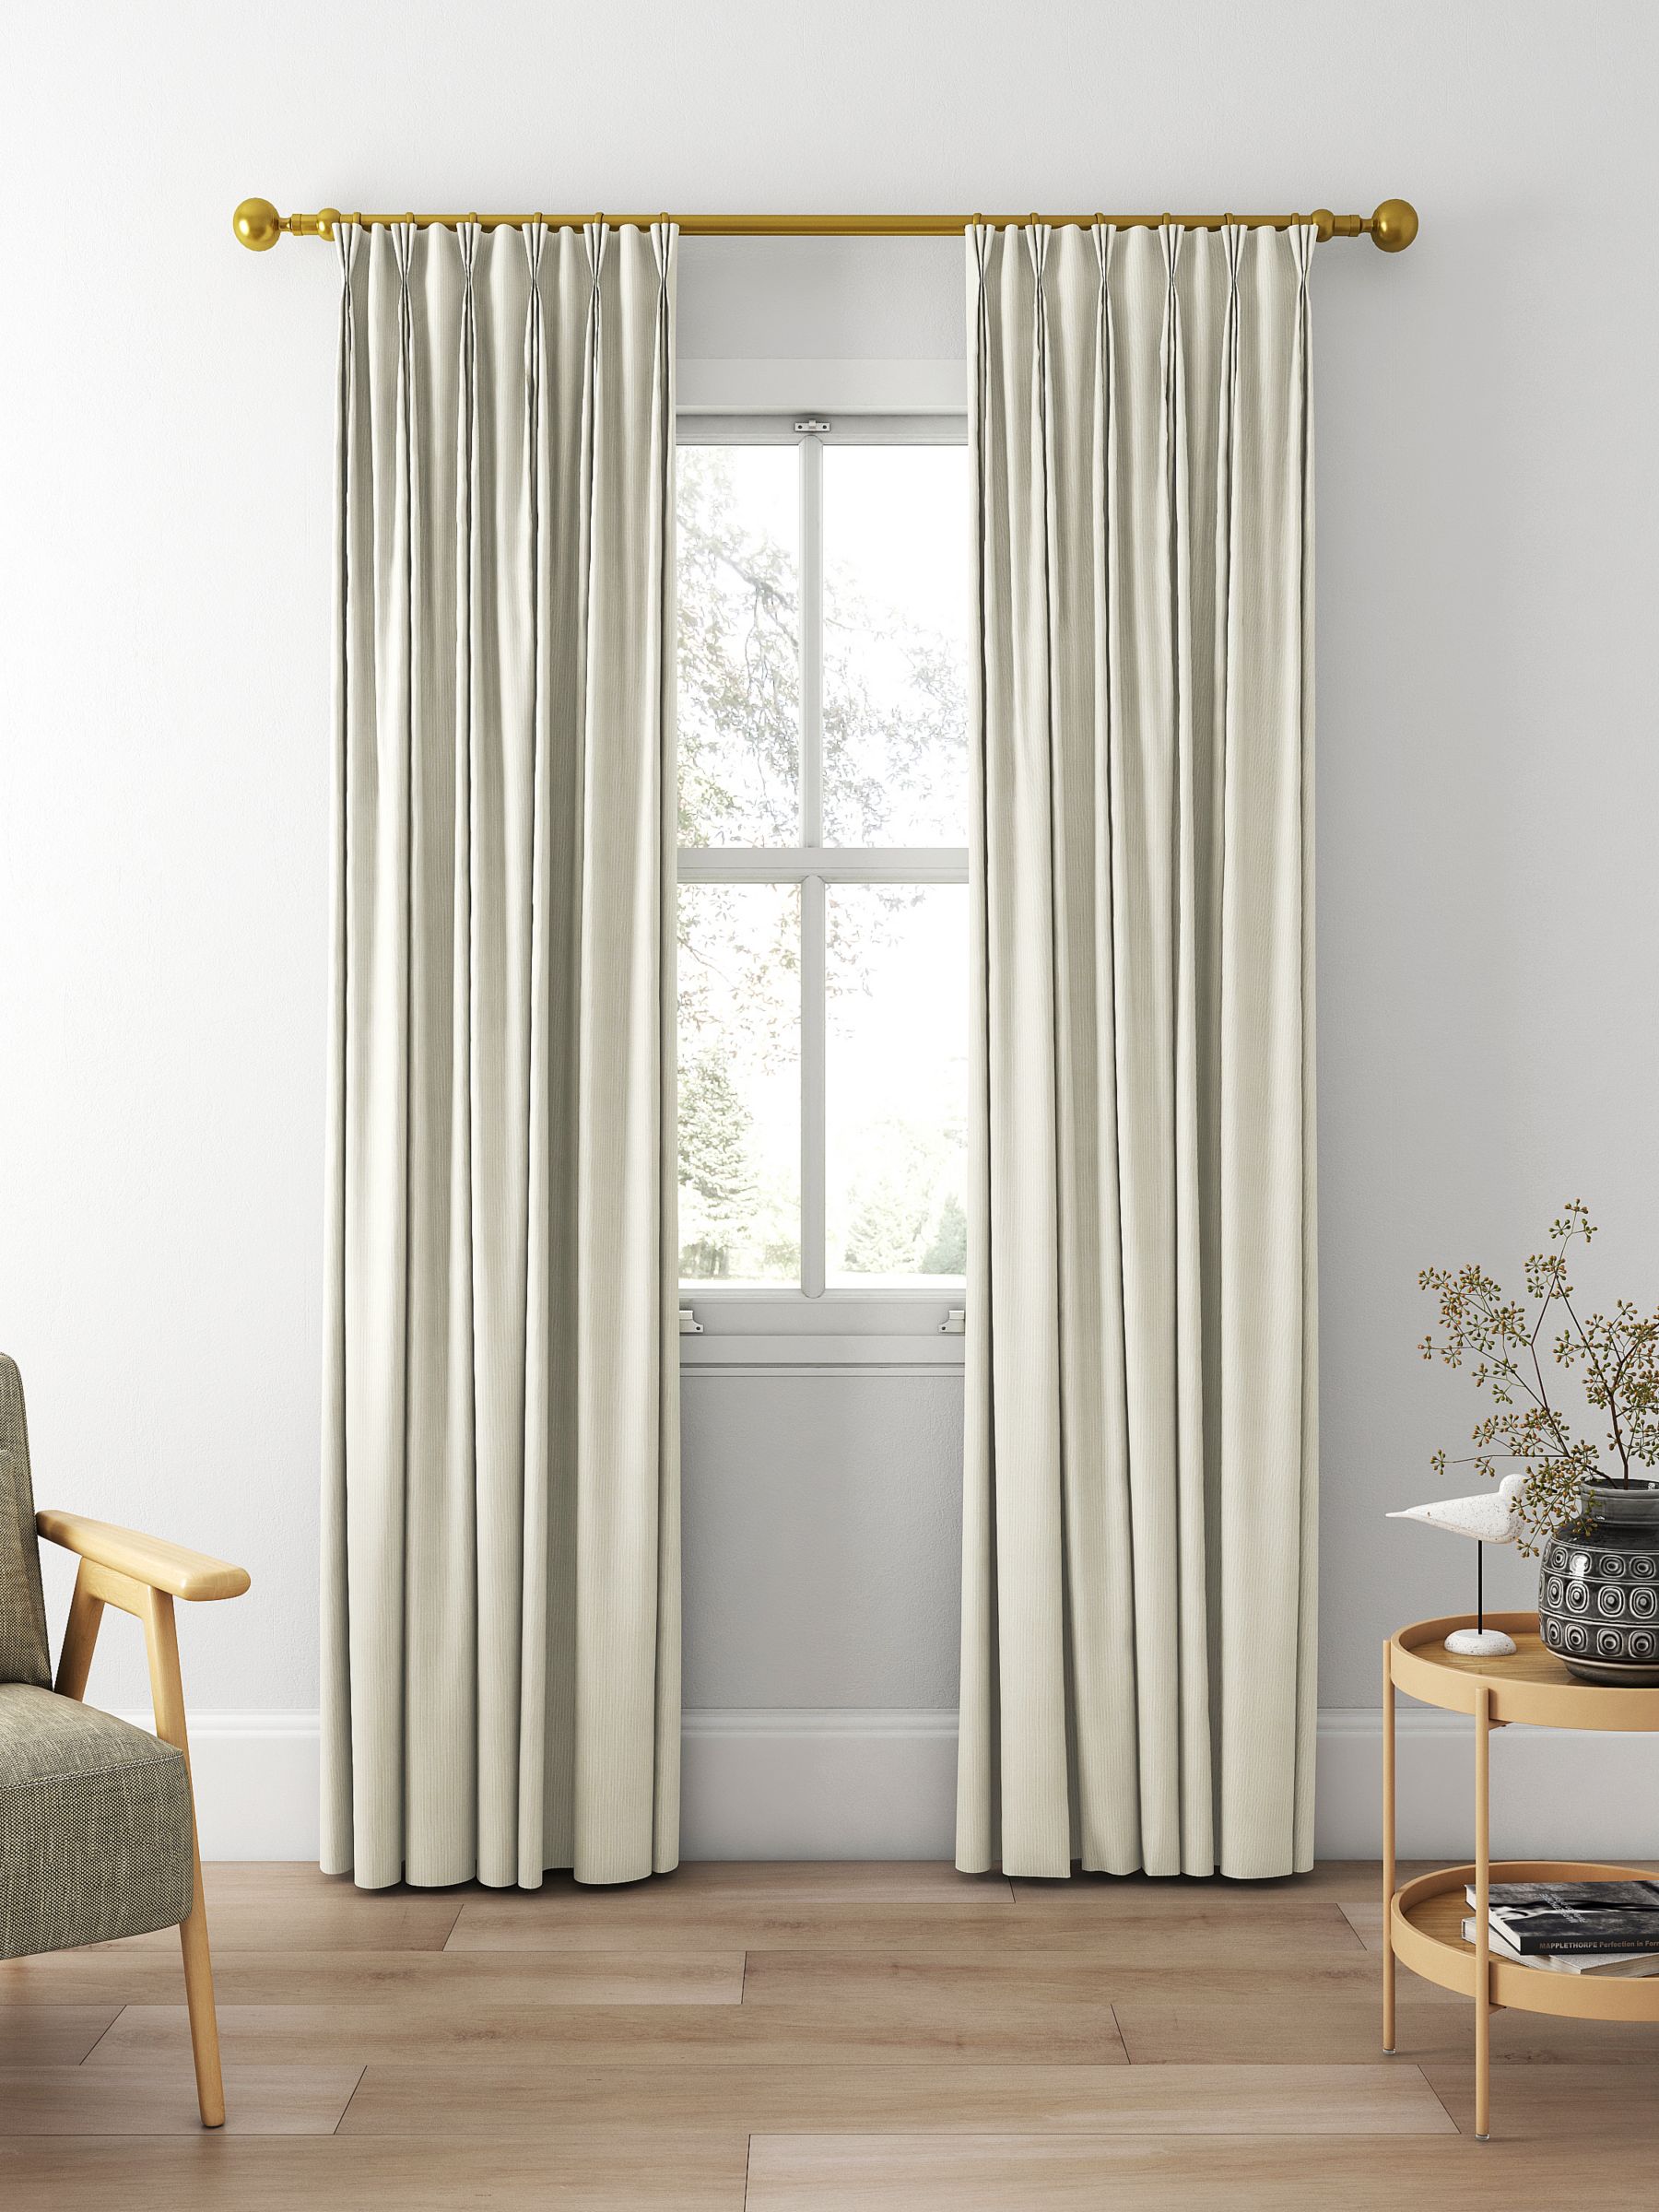 Clarke & Clarke Spencer Made to Measure Curtains, Linen